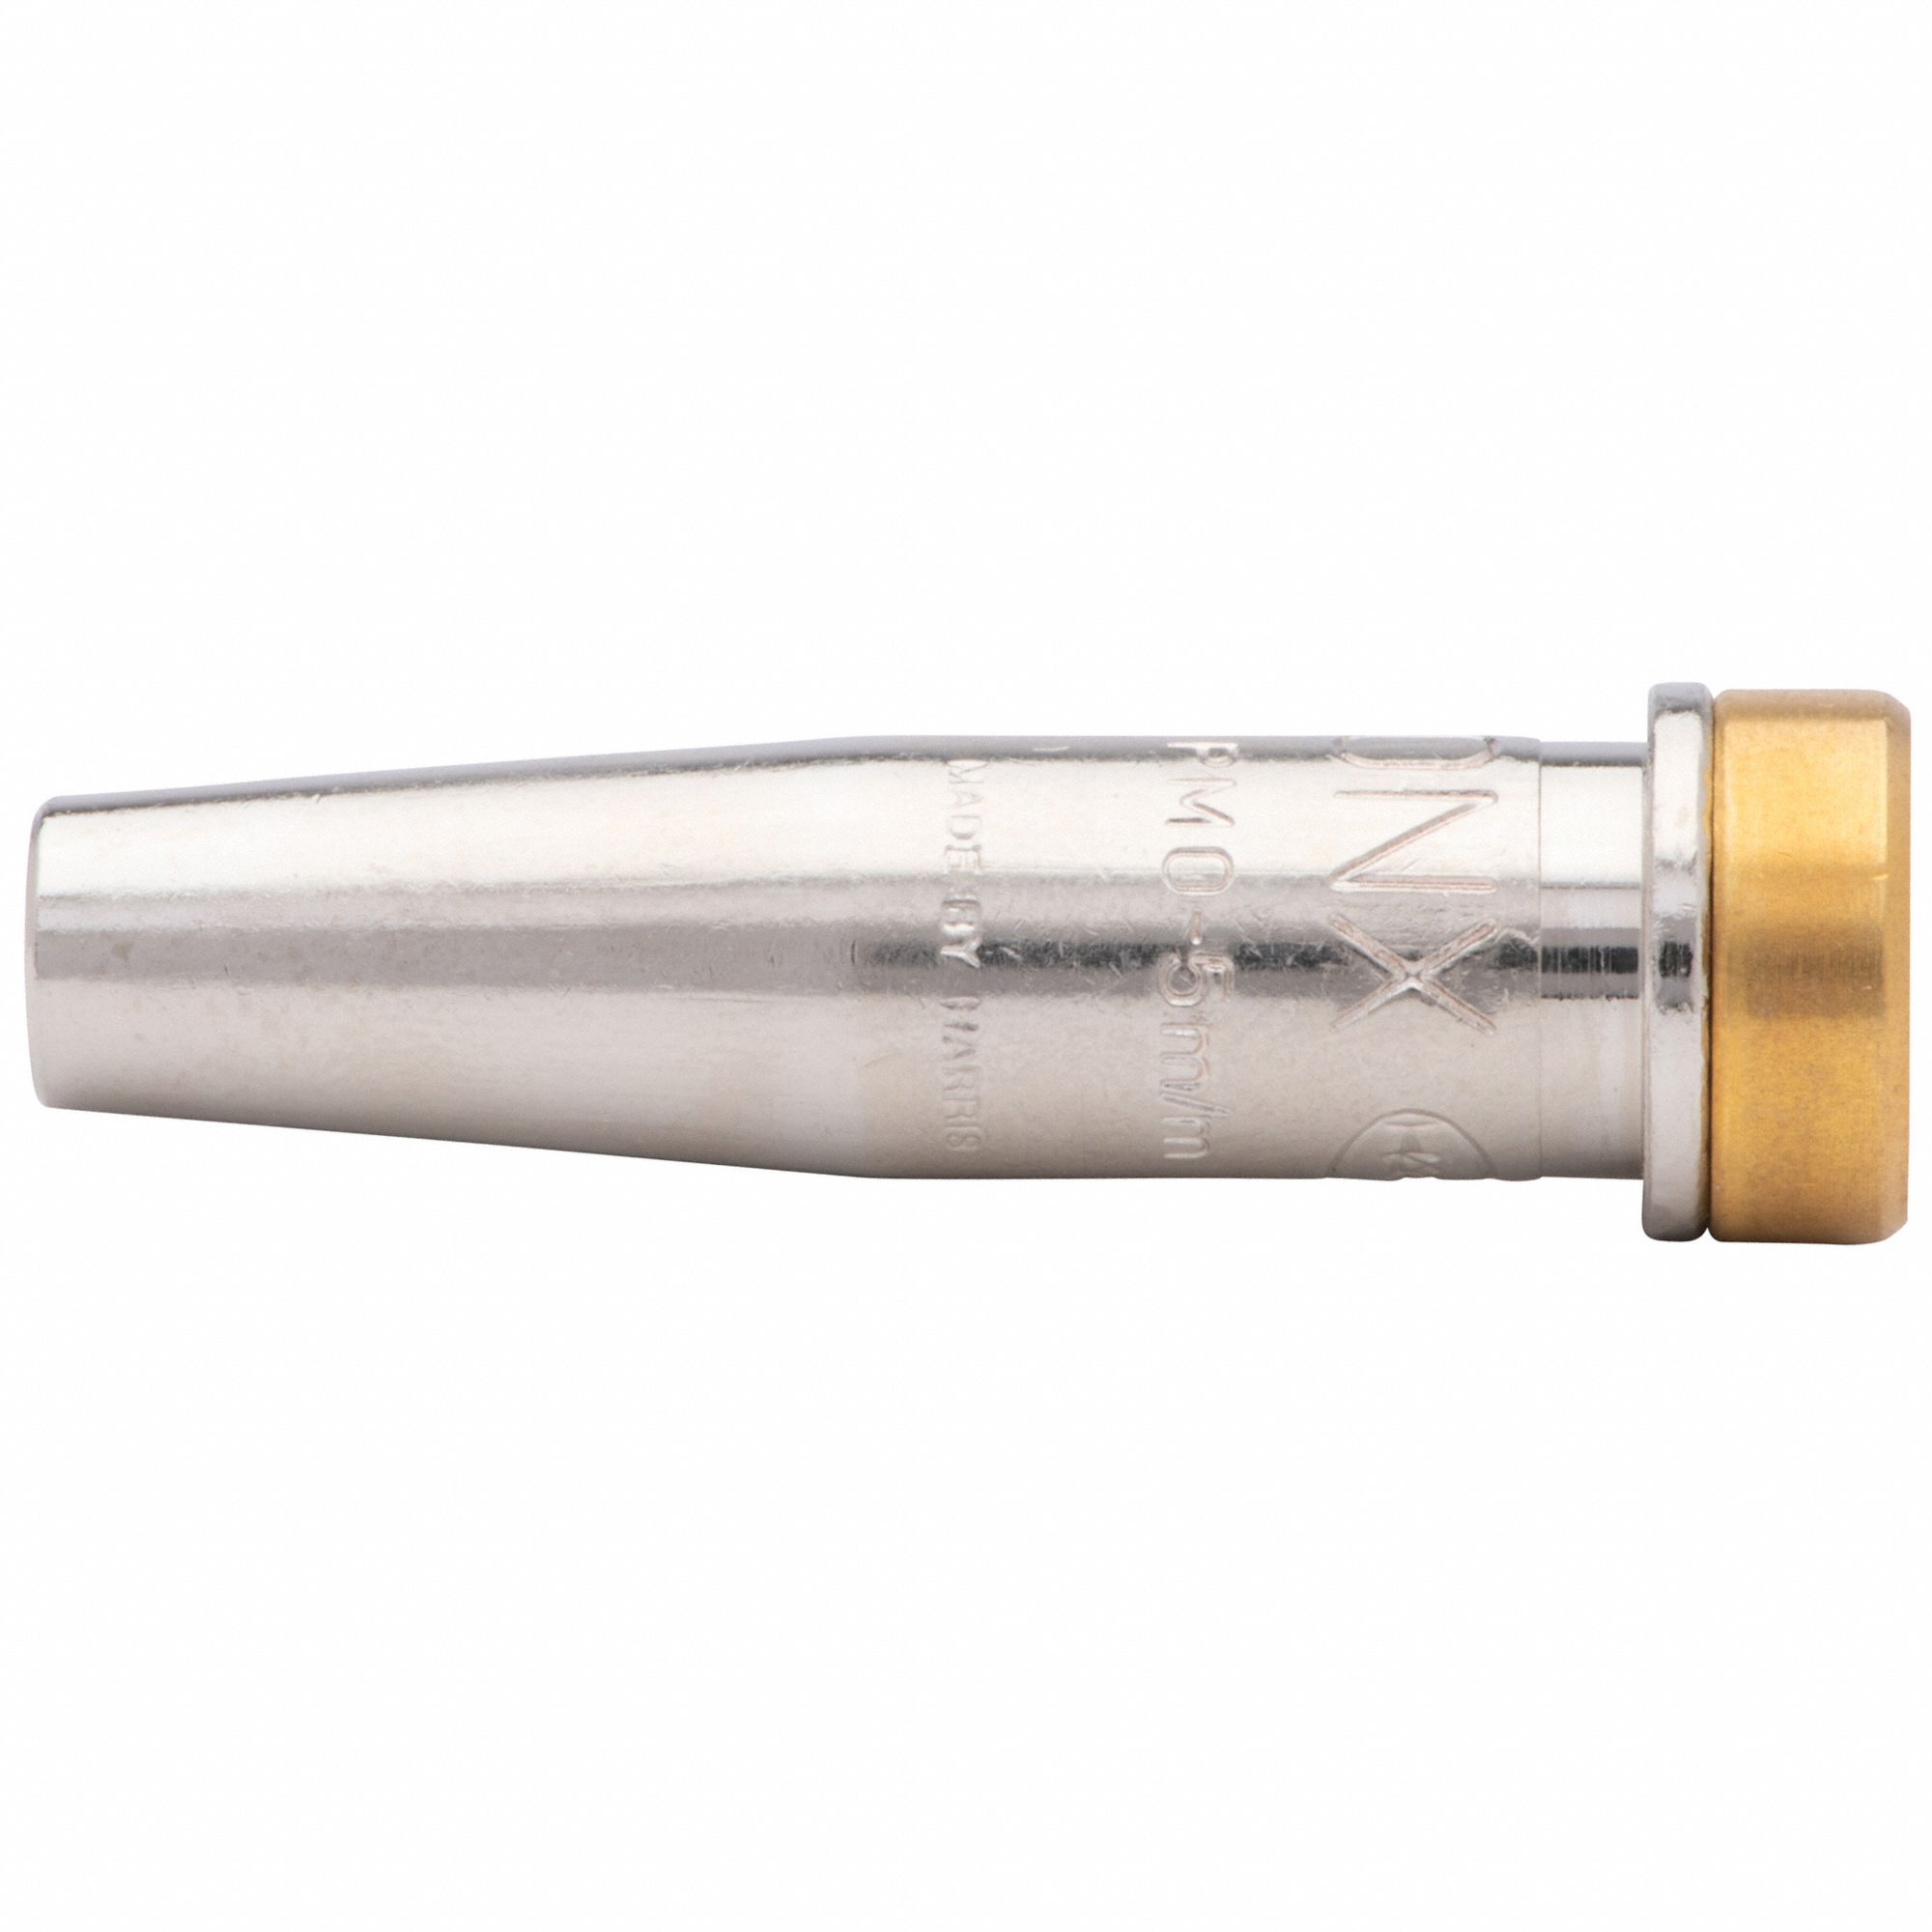 CUTTING TIP, 6290-NX SERIES, SIZE 2, FOR PROPANE & NATURAL GAS, 2 IN